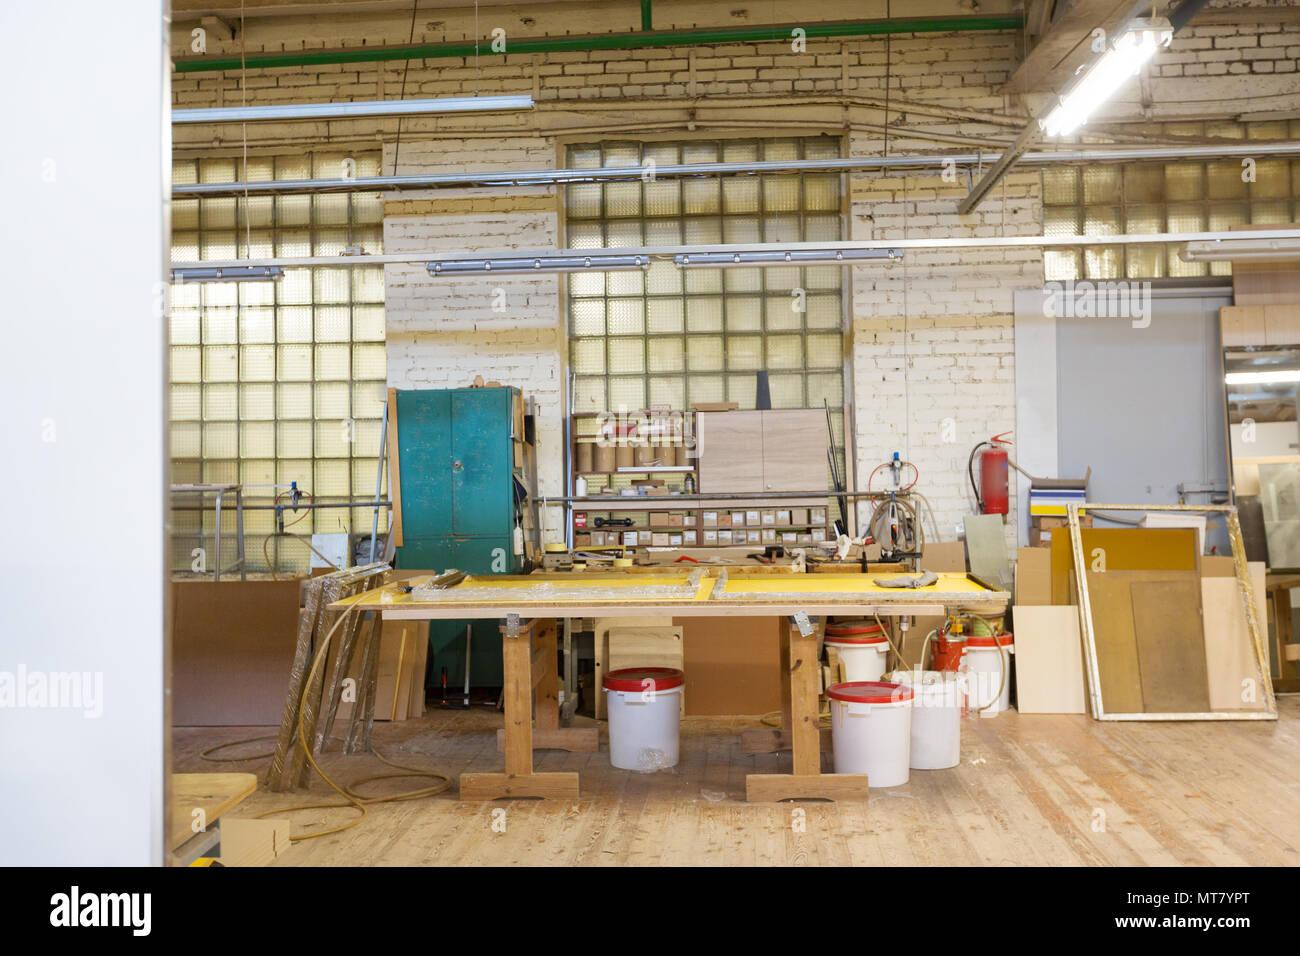 woodworking factory workshop Stock Photo